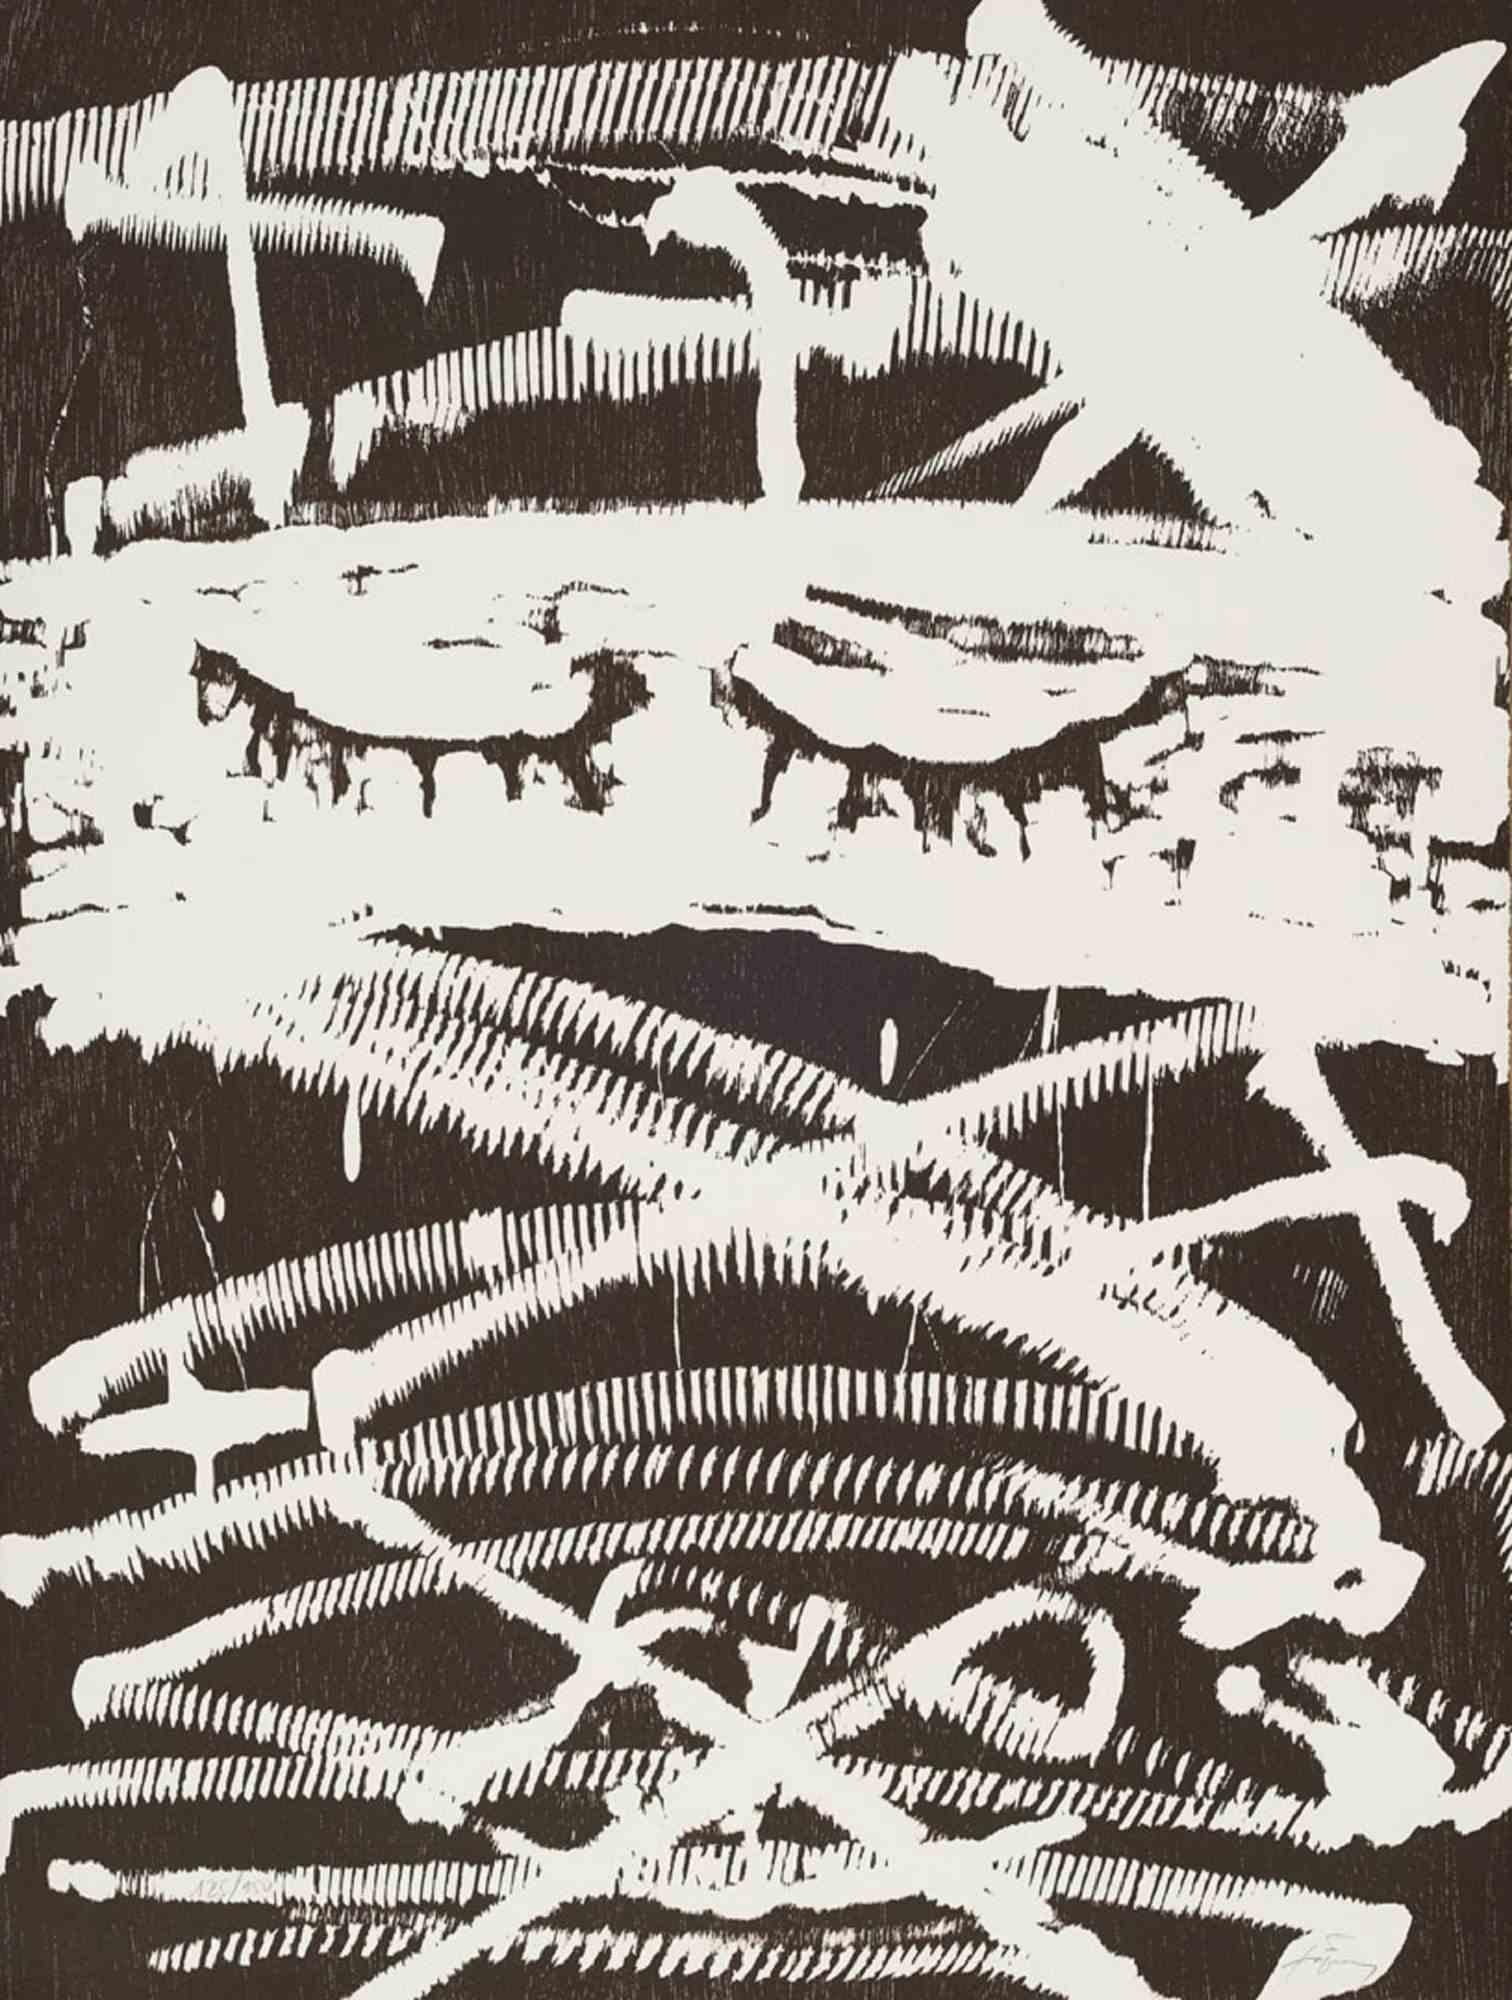 Untitled from Artists Against Torture - Woodcut by Antoni Tapies - 1993